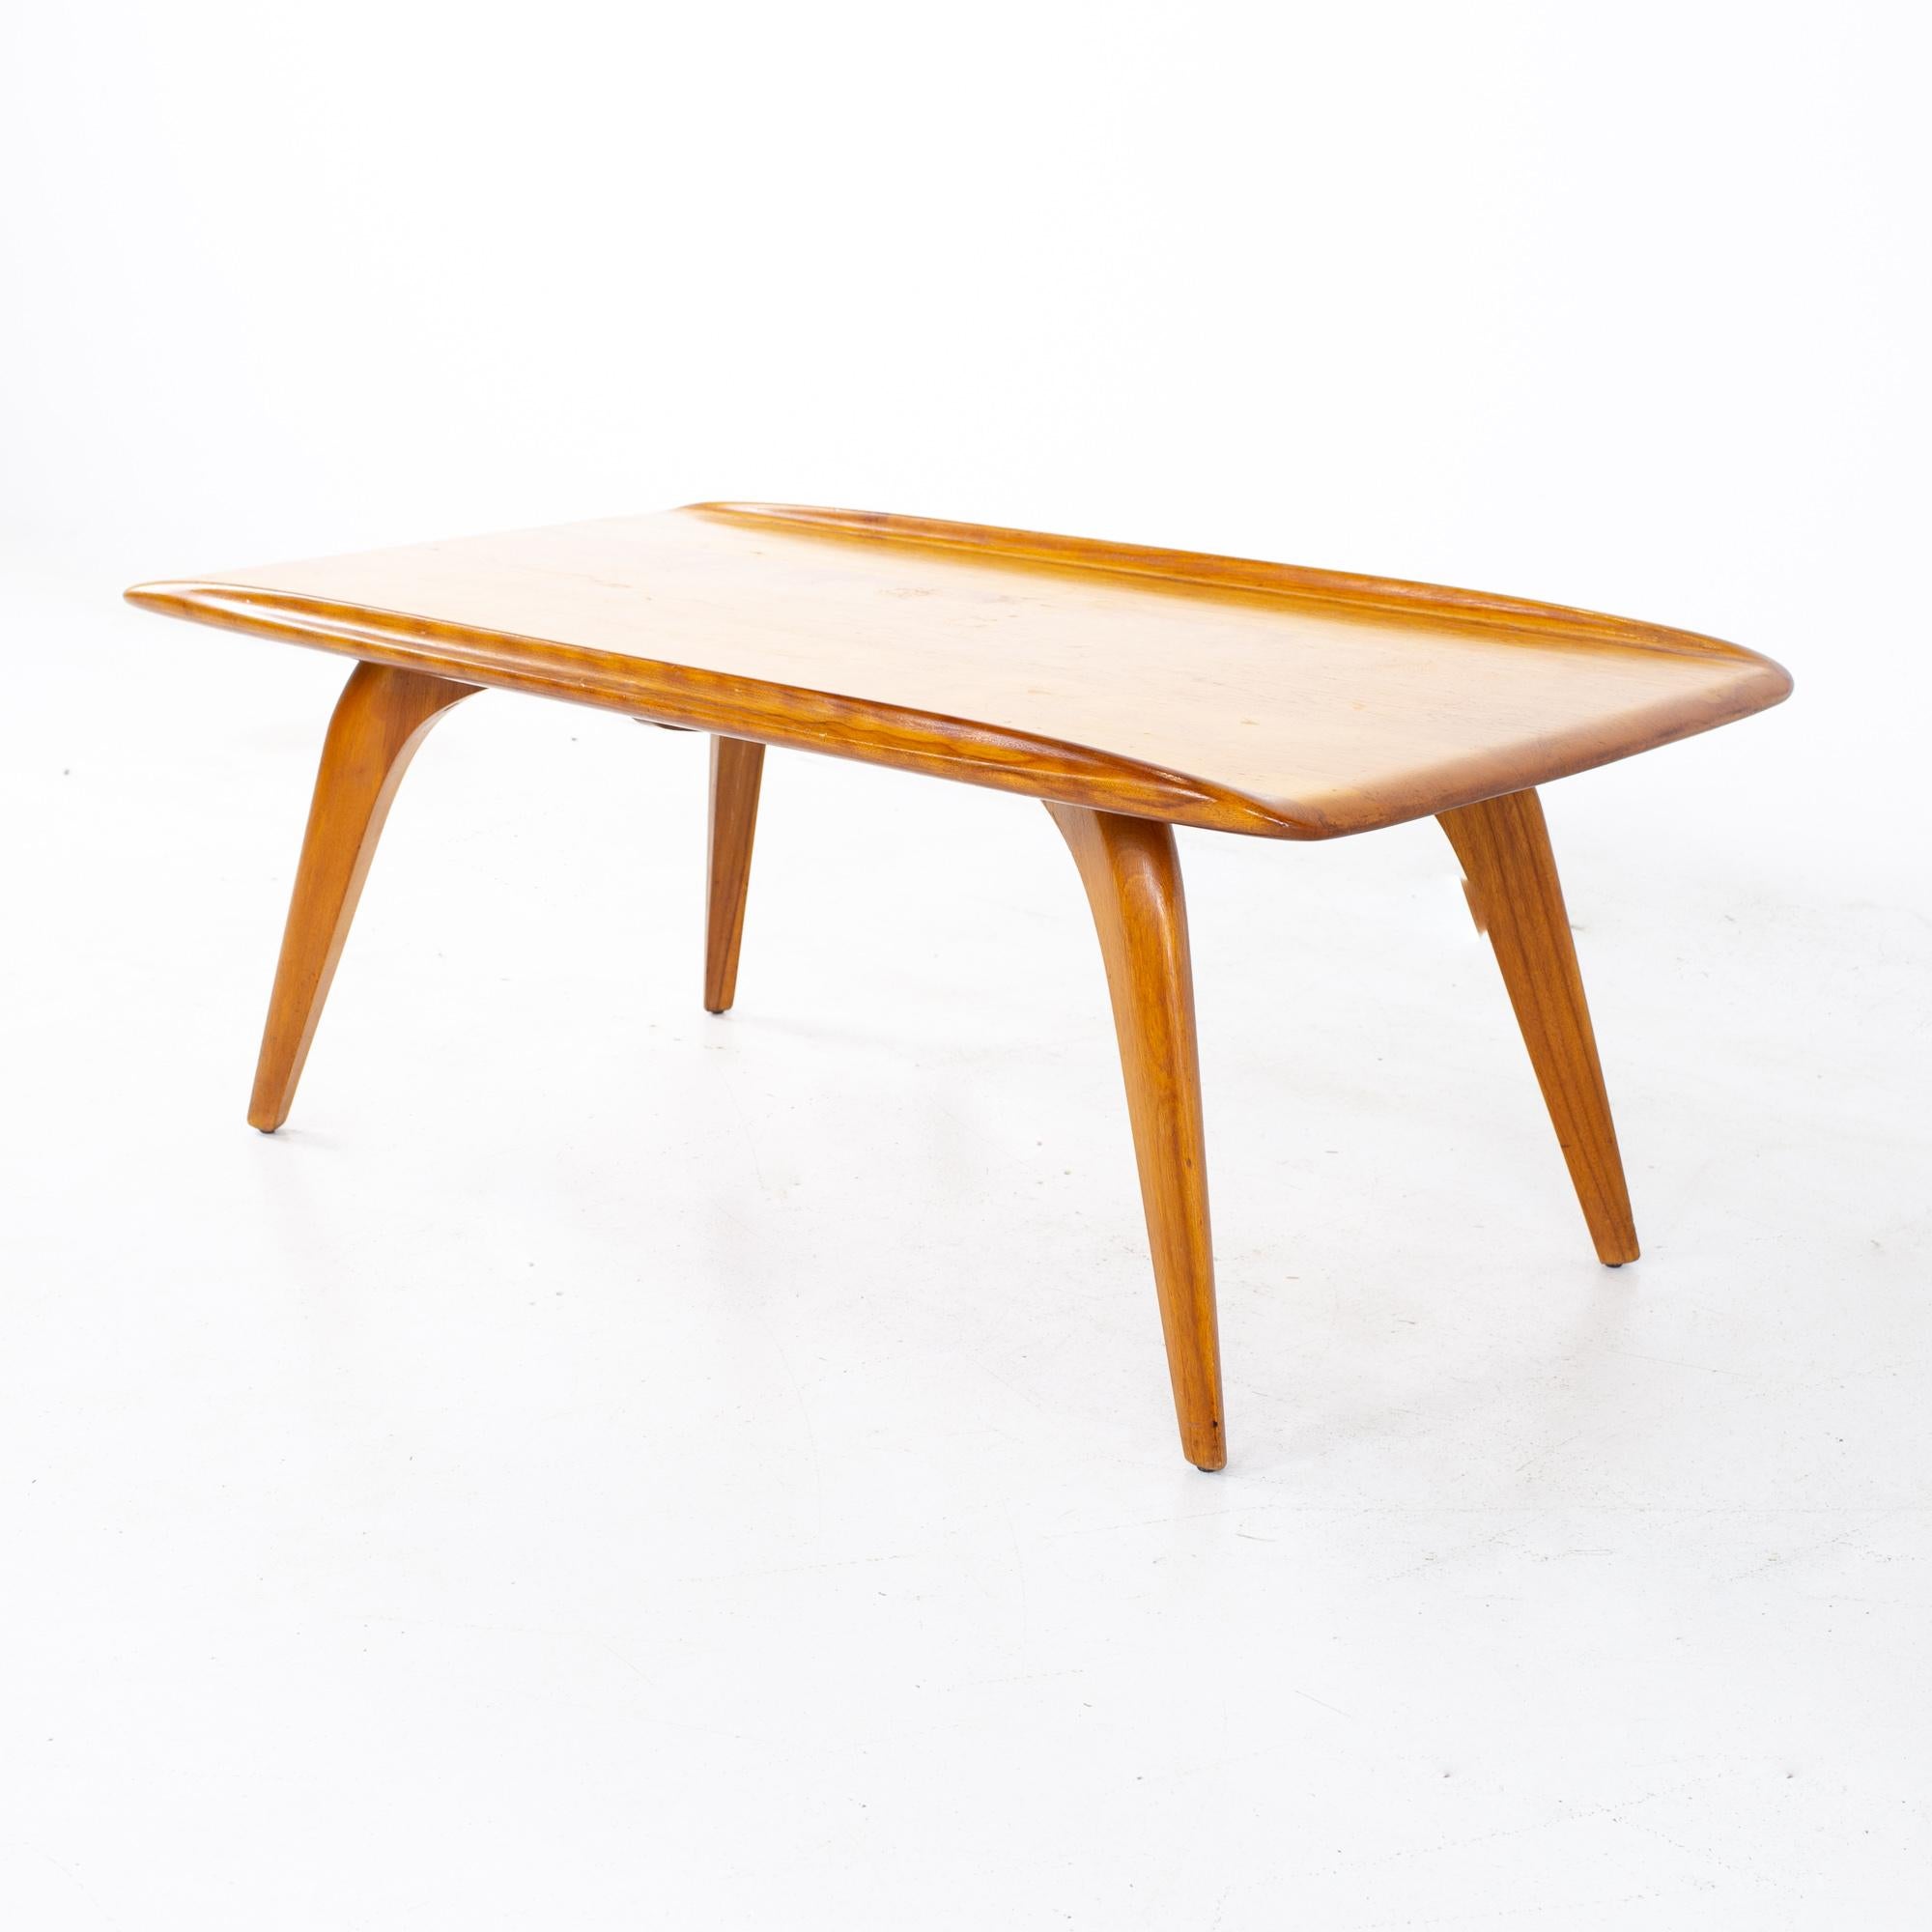 Heywood Wakefield mid century coffee table
Table measures: 45.5 wide x 22.5 deep x 16 inches high

All pieces of furniture can be had in what we call restored vintage condition. That means the piece is restored upon purchase so it’s free of